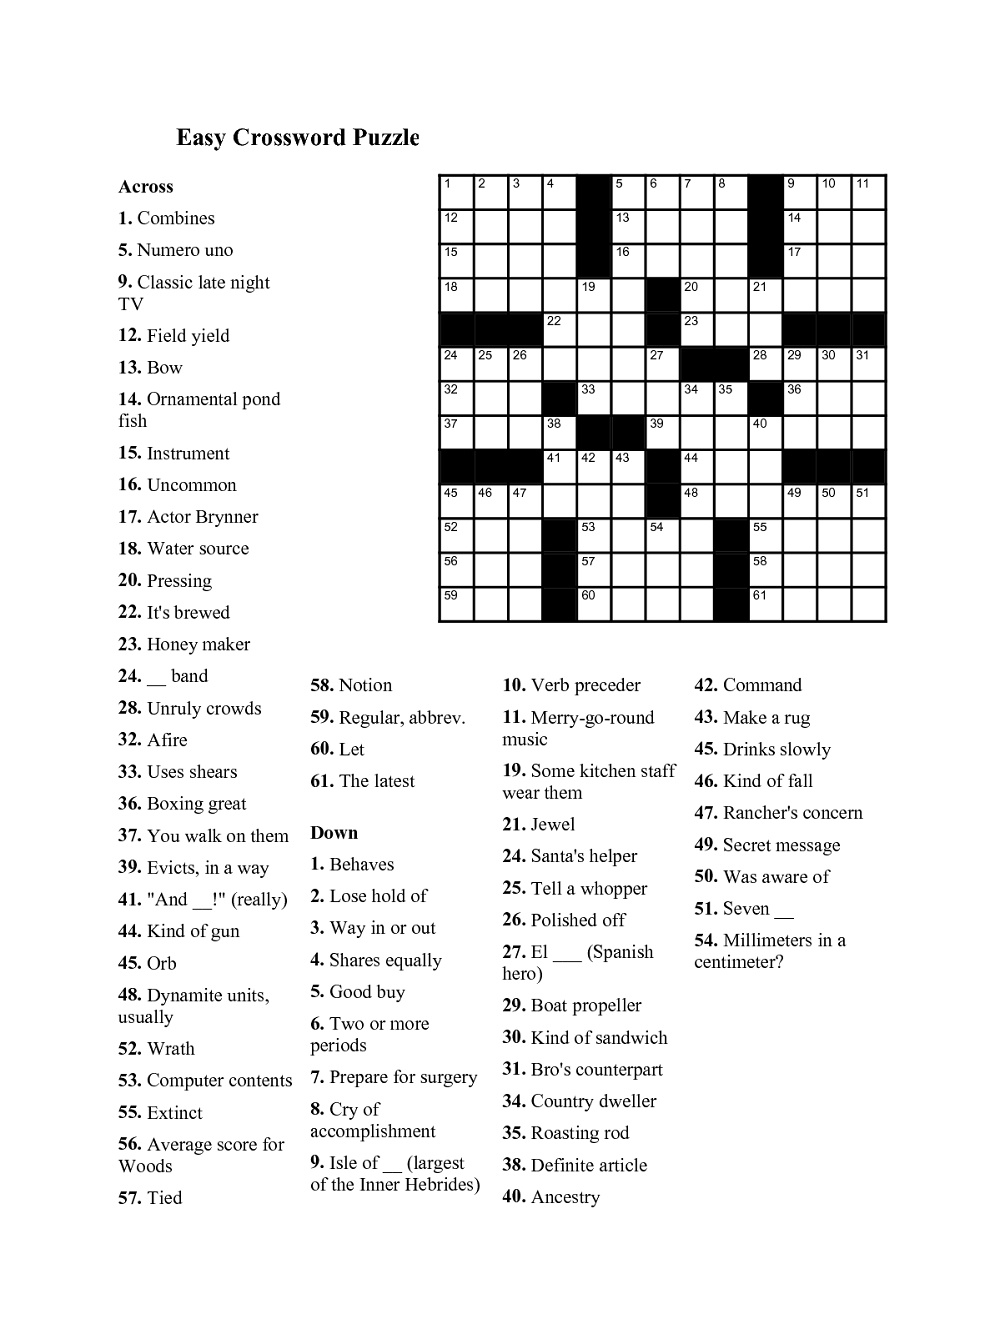 Easy Crossword Puzzles For Senior Activity | Kiddo Shelter - Simple Crossword Puzzles Printable Free